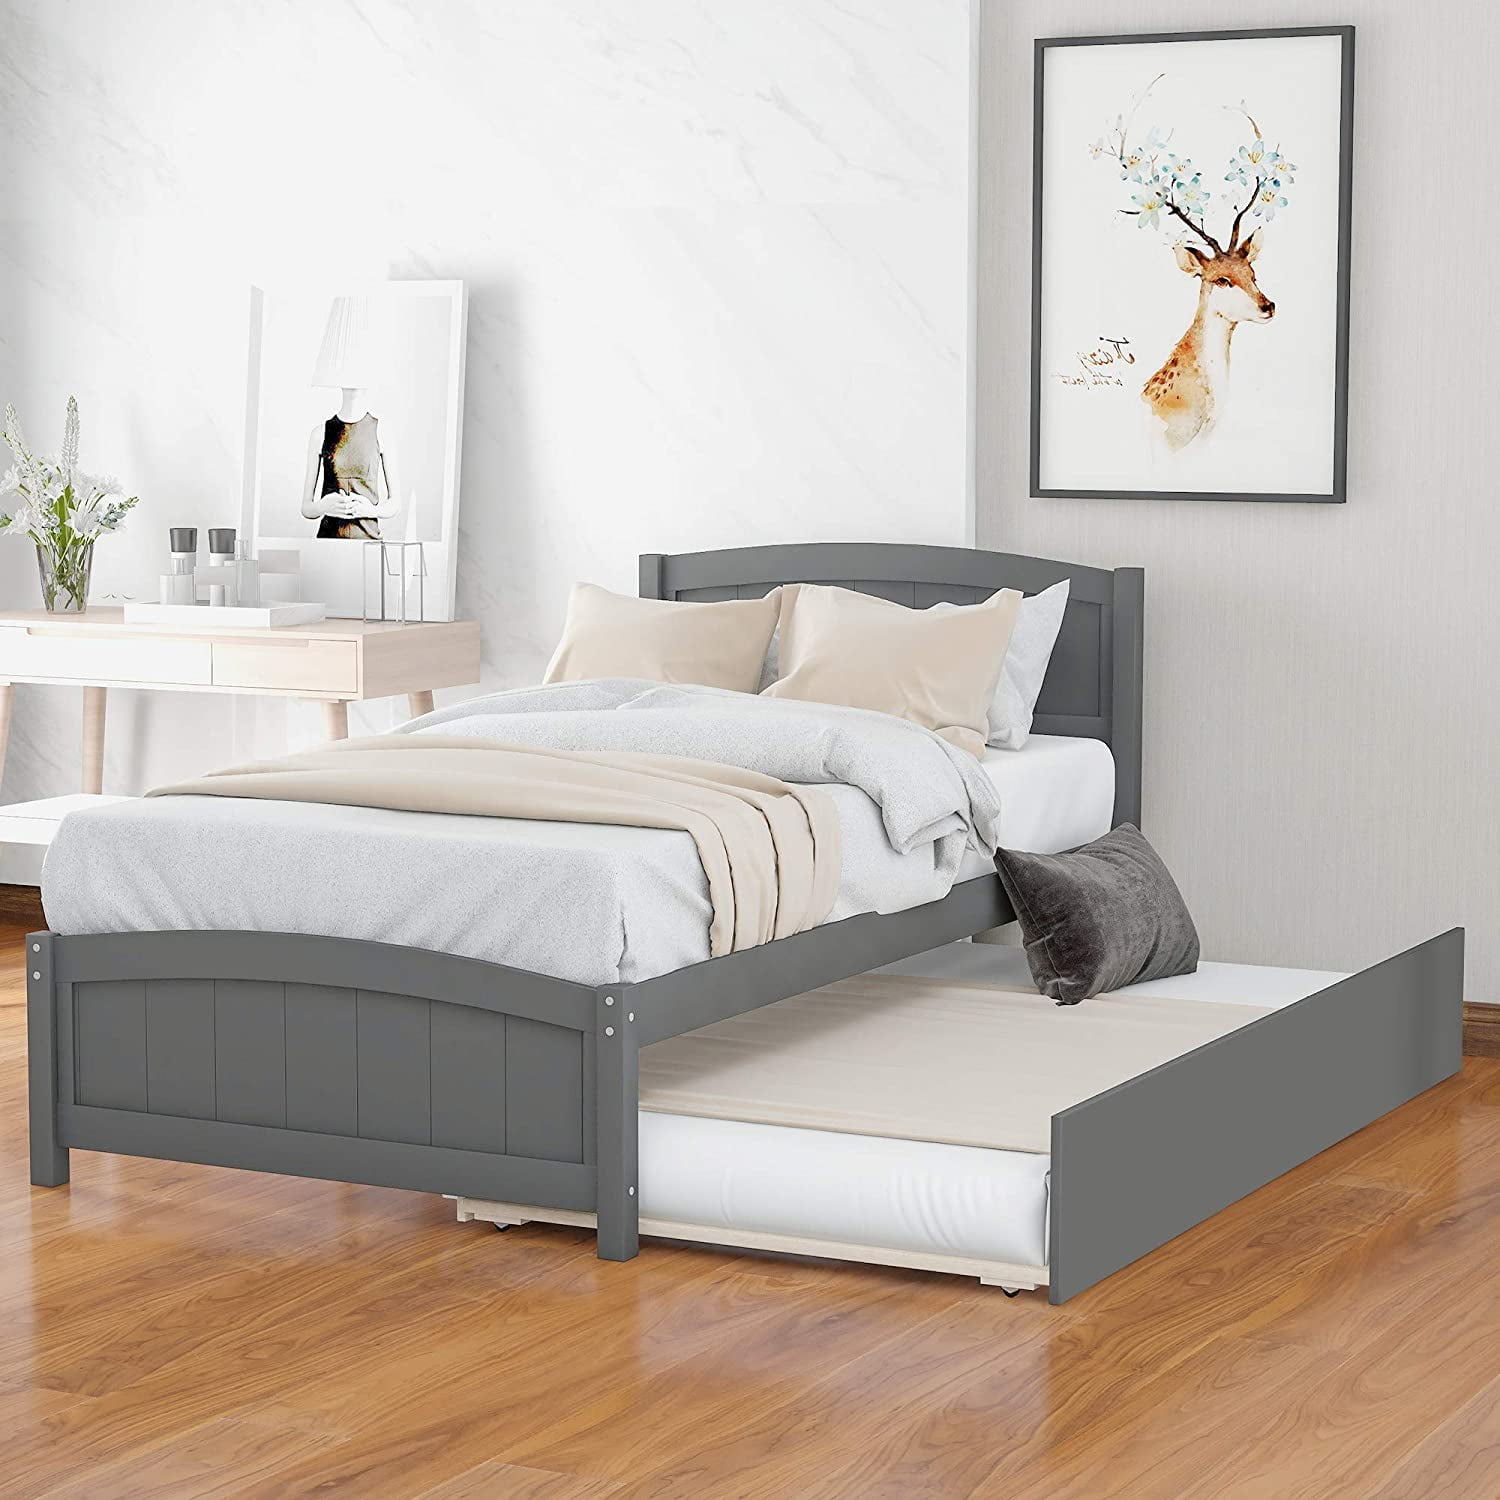 Twin Size Platform Bed Frame With, Twin Size Platform Bed